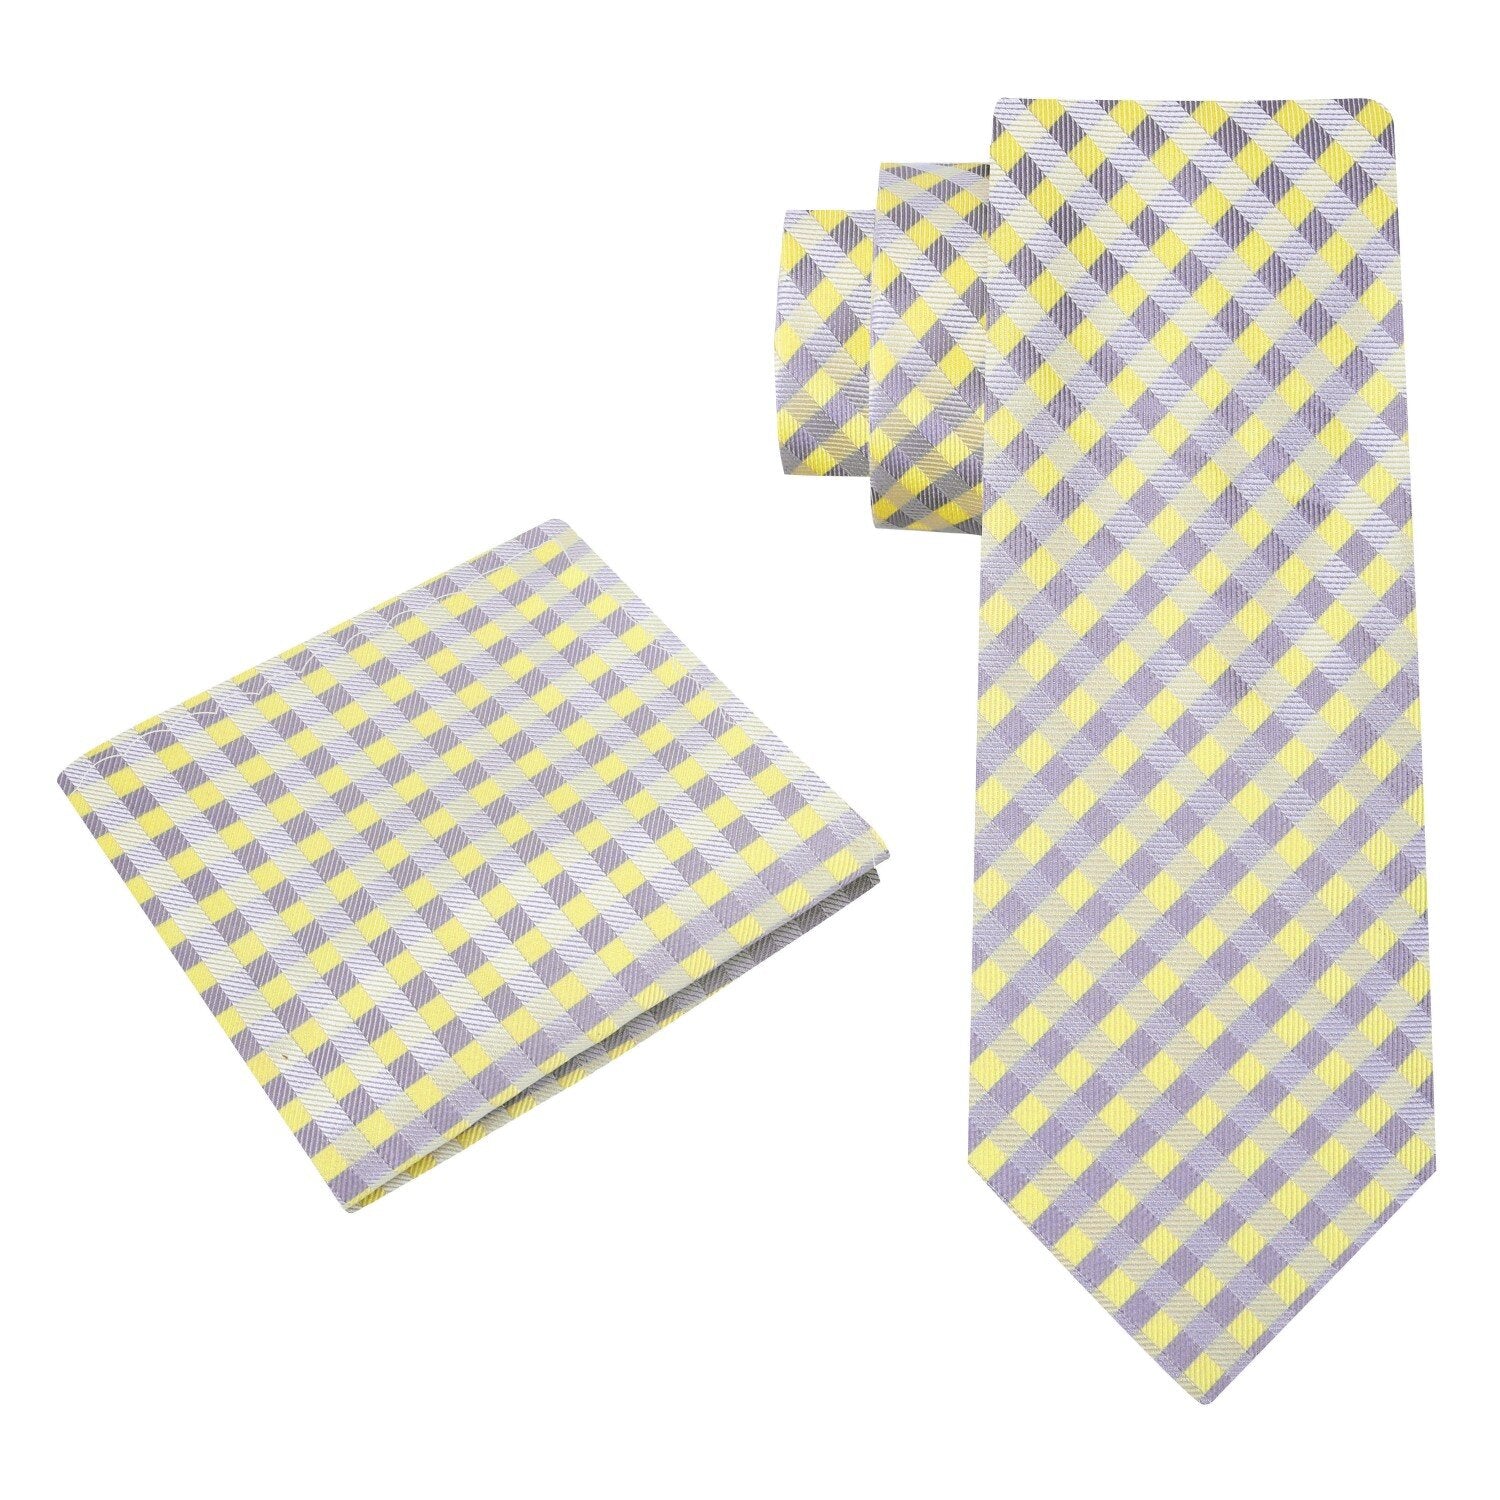 Alt View: Yellow, Grey Geometric Tie and Pocket Square